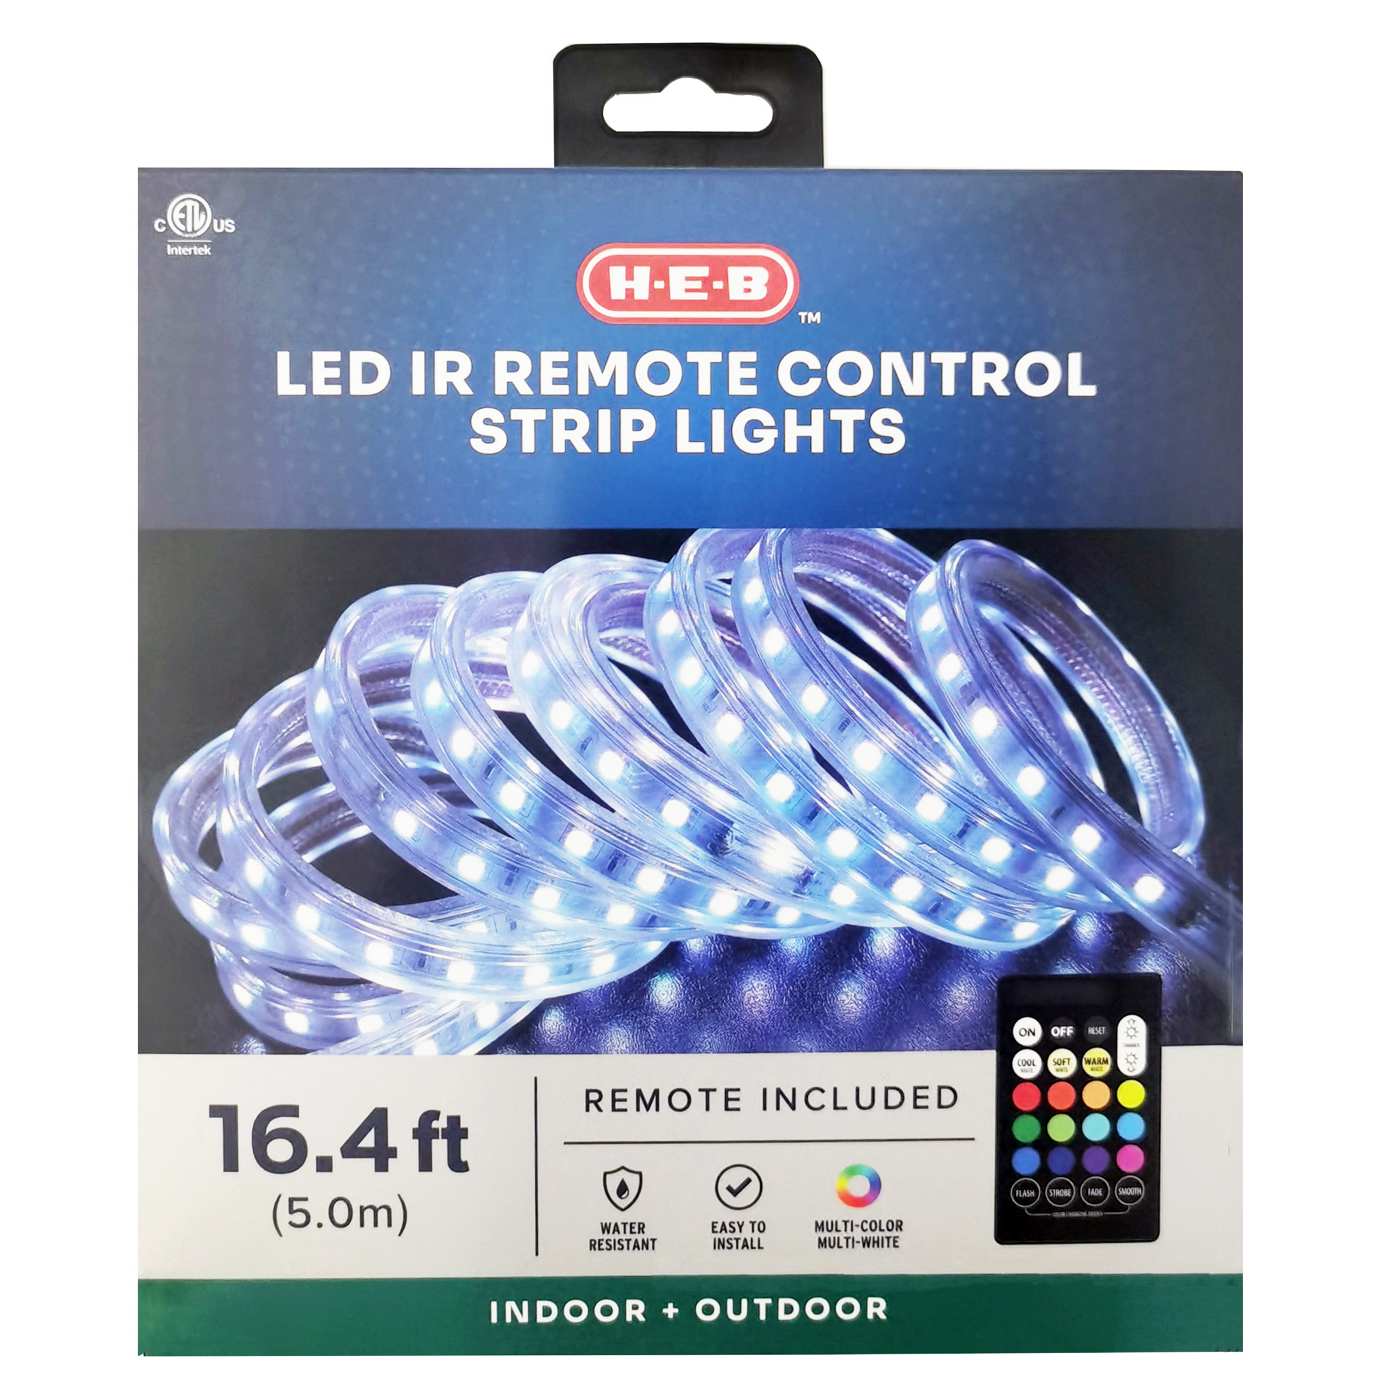 H-E-B LED Indoor/Outdoor Remote Control Strip Lights; image 1 of 2